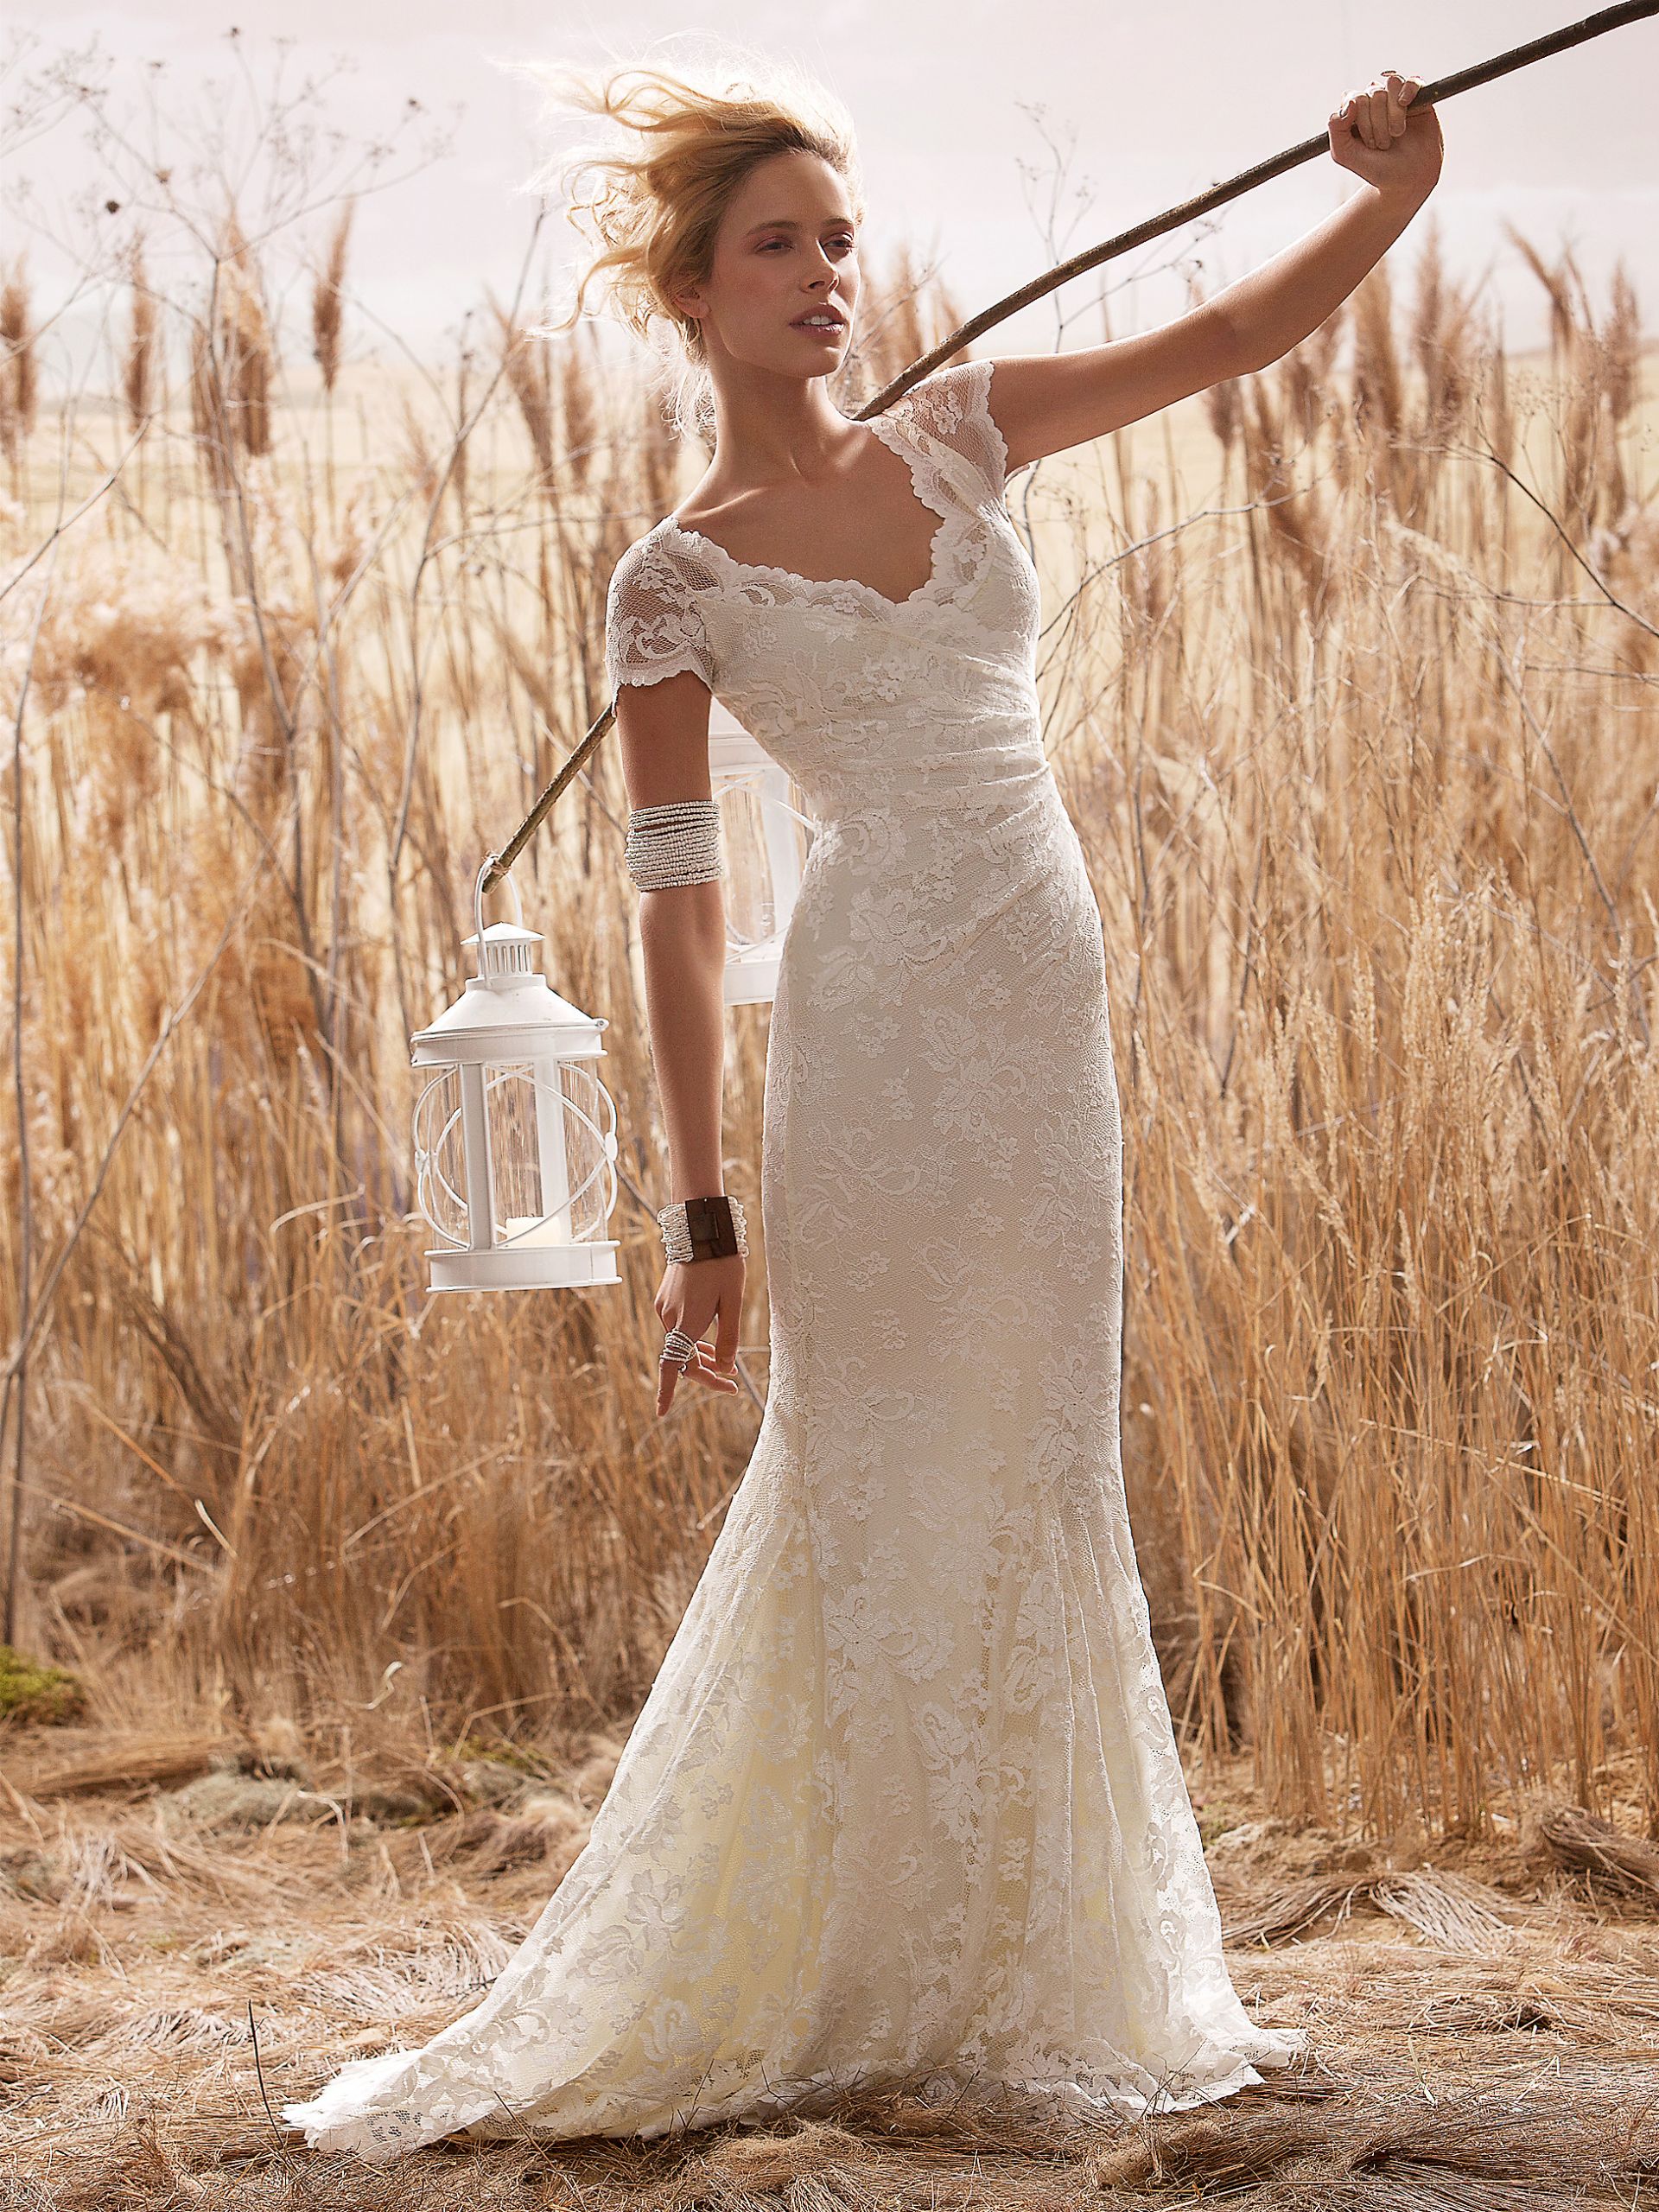 Country Chic Wedding Dresses
 Wedding Gowns From Olvi s Rustic Wedding Chic